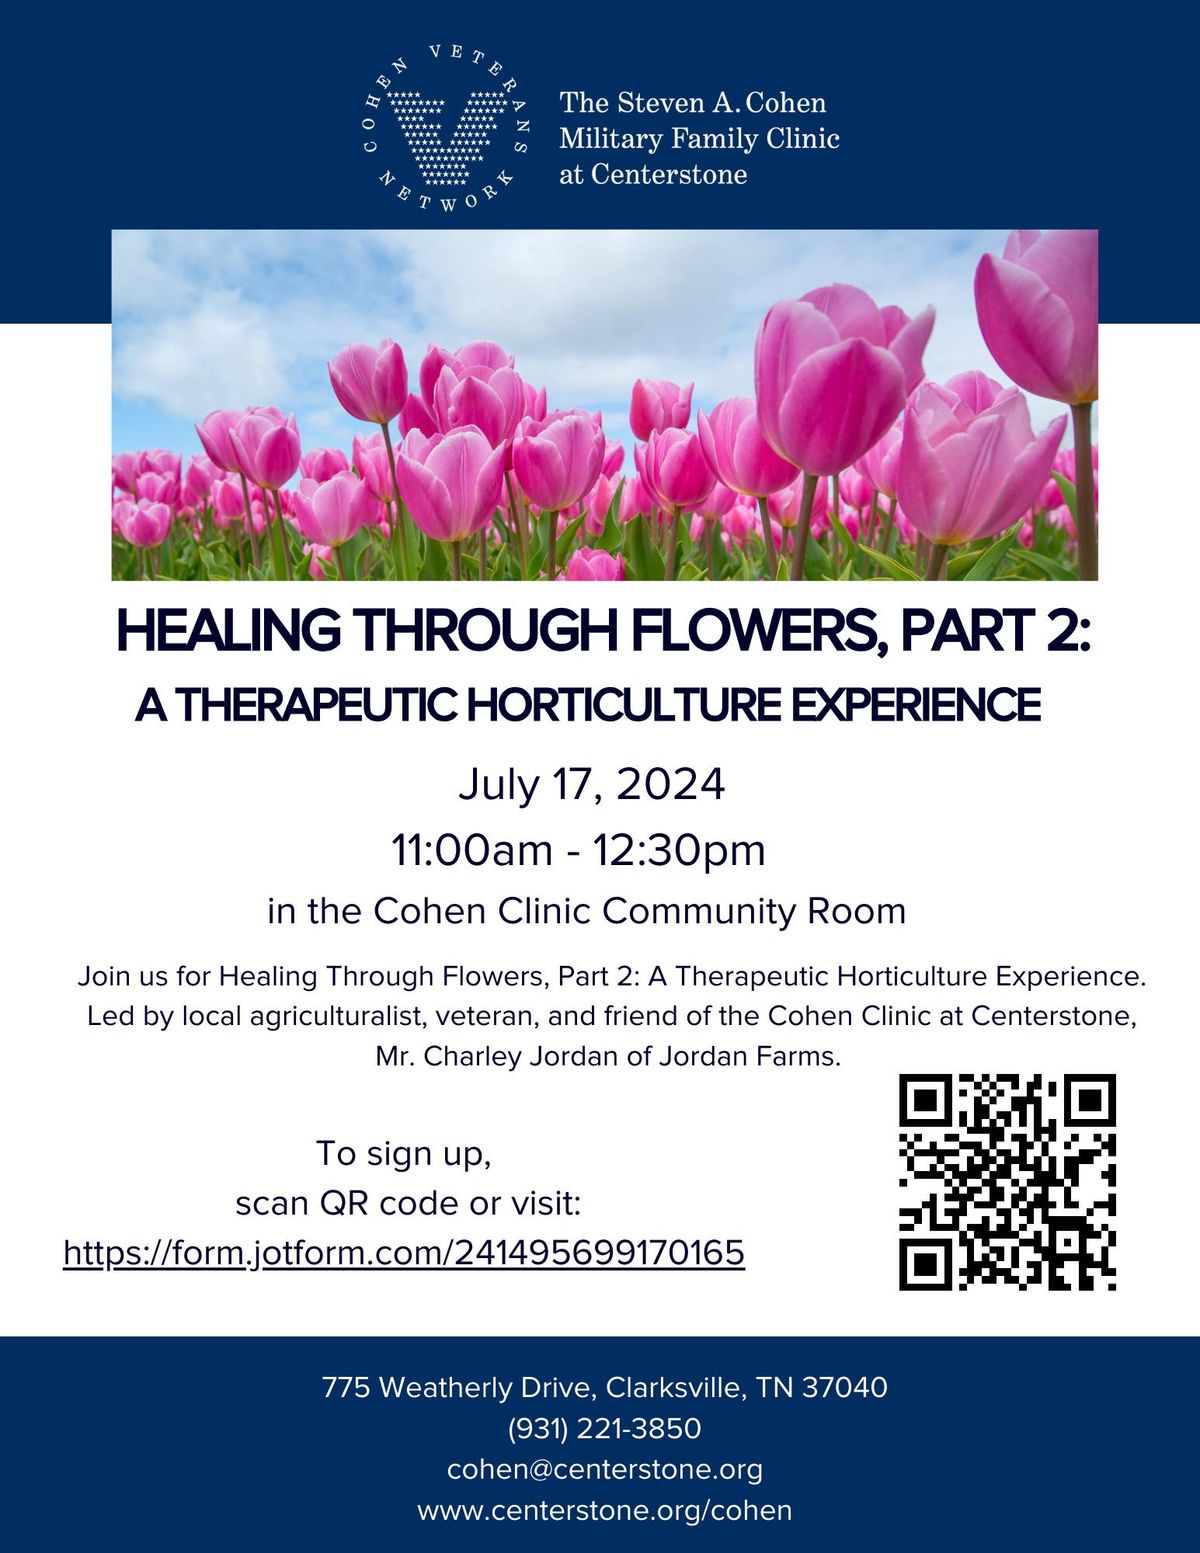 Healing Through Flowers, Part 2: A Therapeutic Horticulture Experience